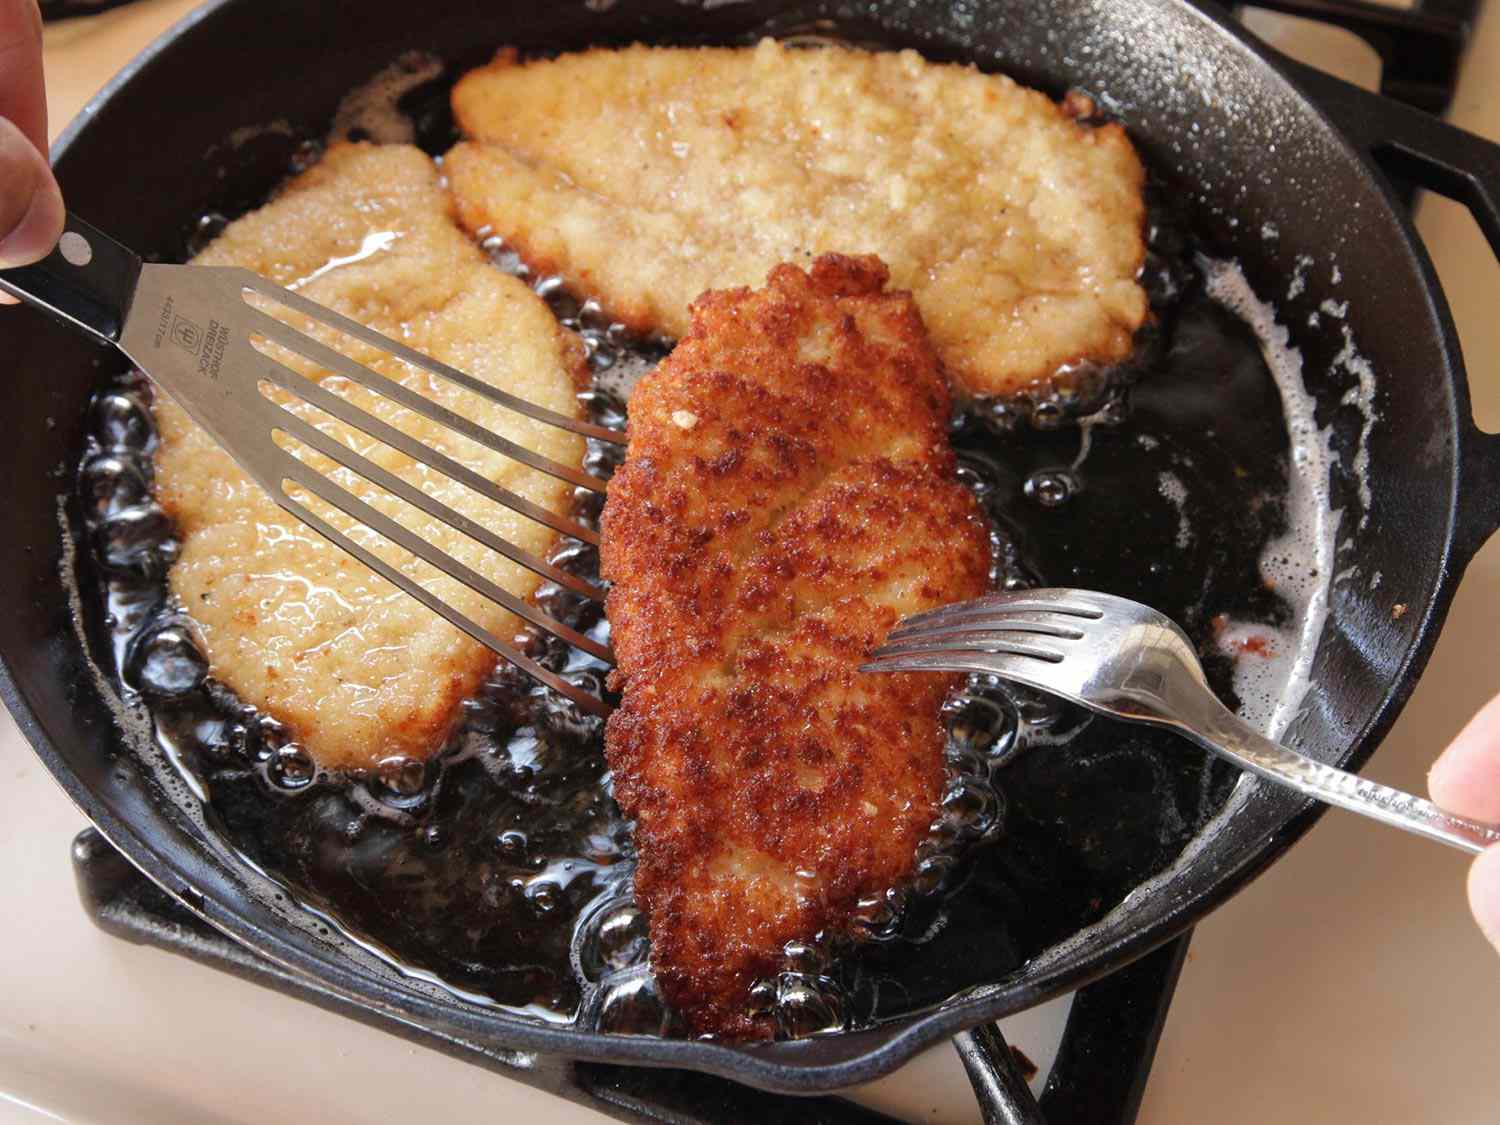 Using spatula and fork to gently flip over golden brown underside fried chicken breast in hot oil